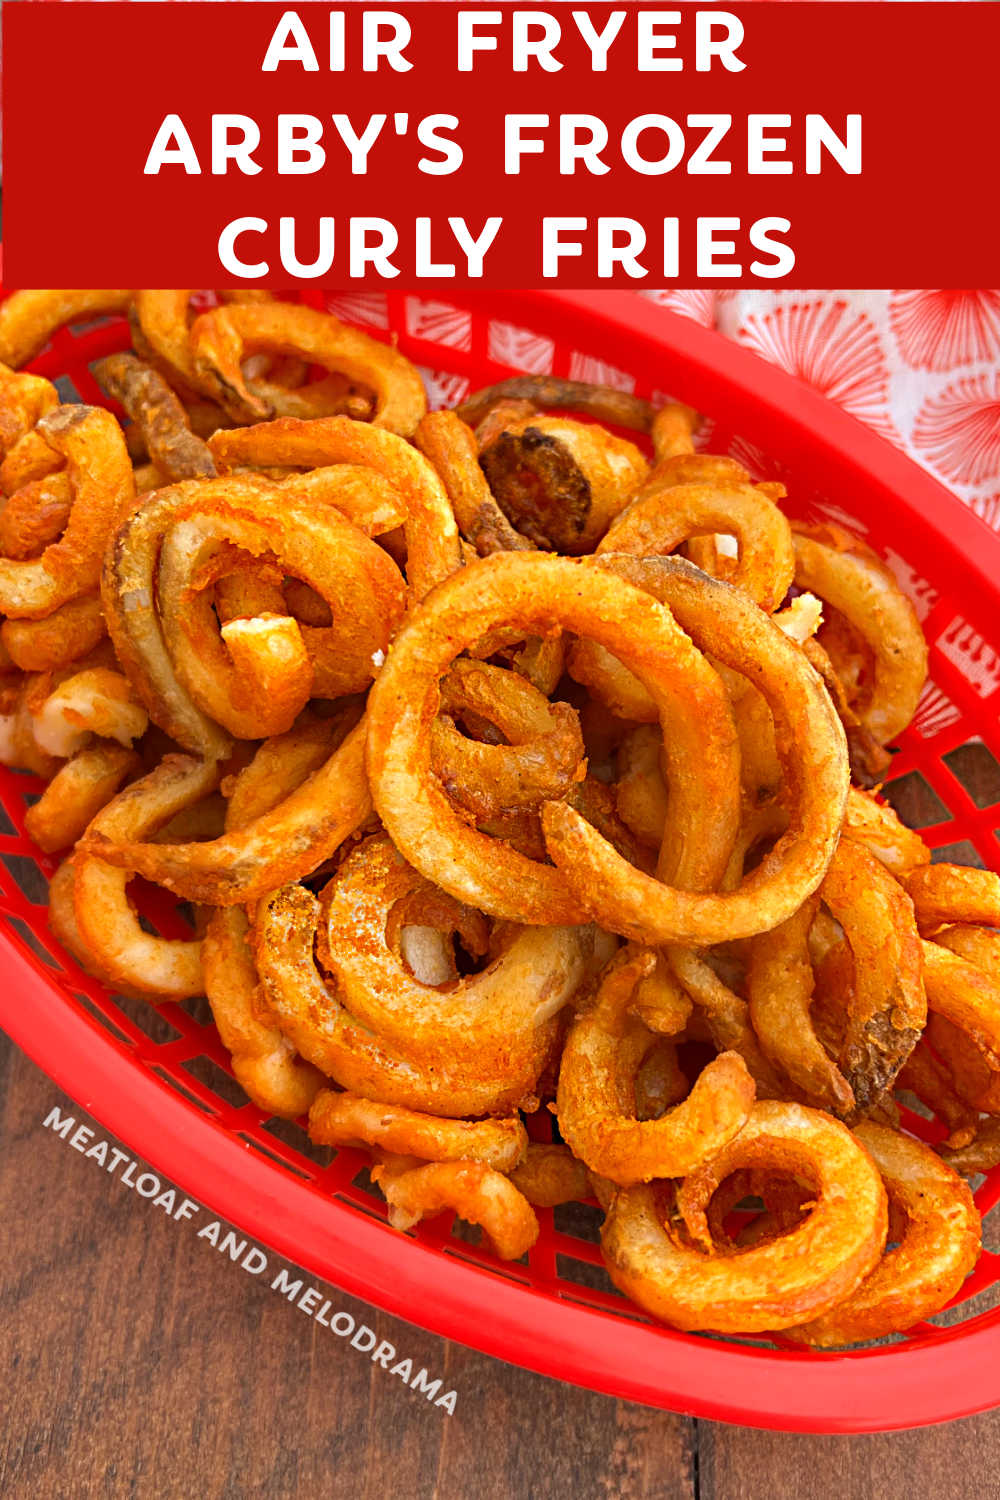 Make Arby's curly fries in the air fryer with this easy recipe for air fryer frozen curly fries. An easy side dish ready in minutes and perfect with your favorite burgers, hot dogs and chicken sandwiches! via @meamel